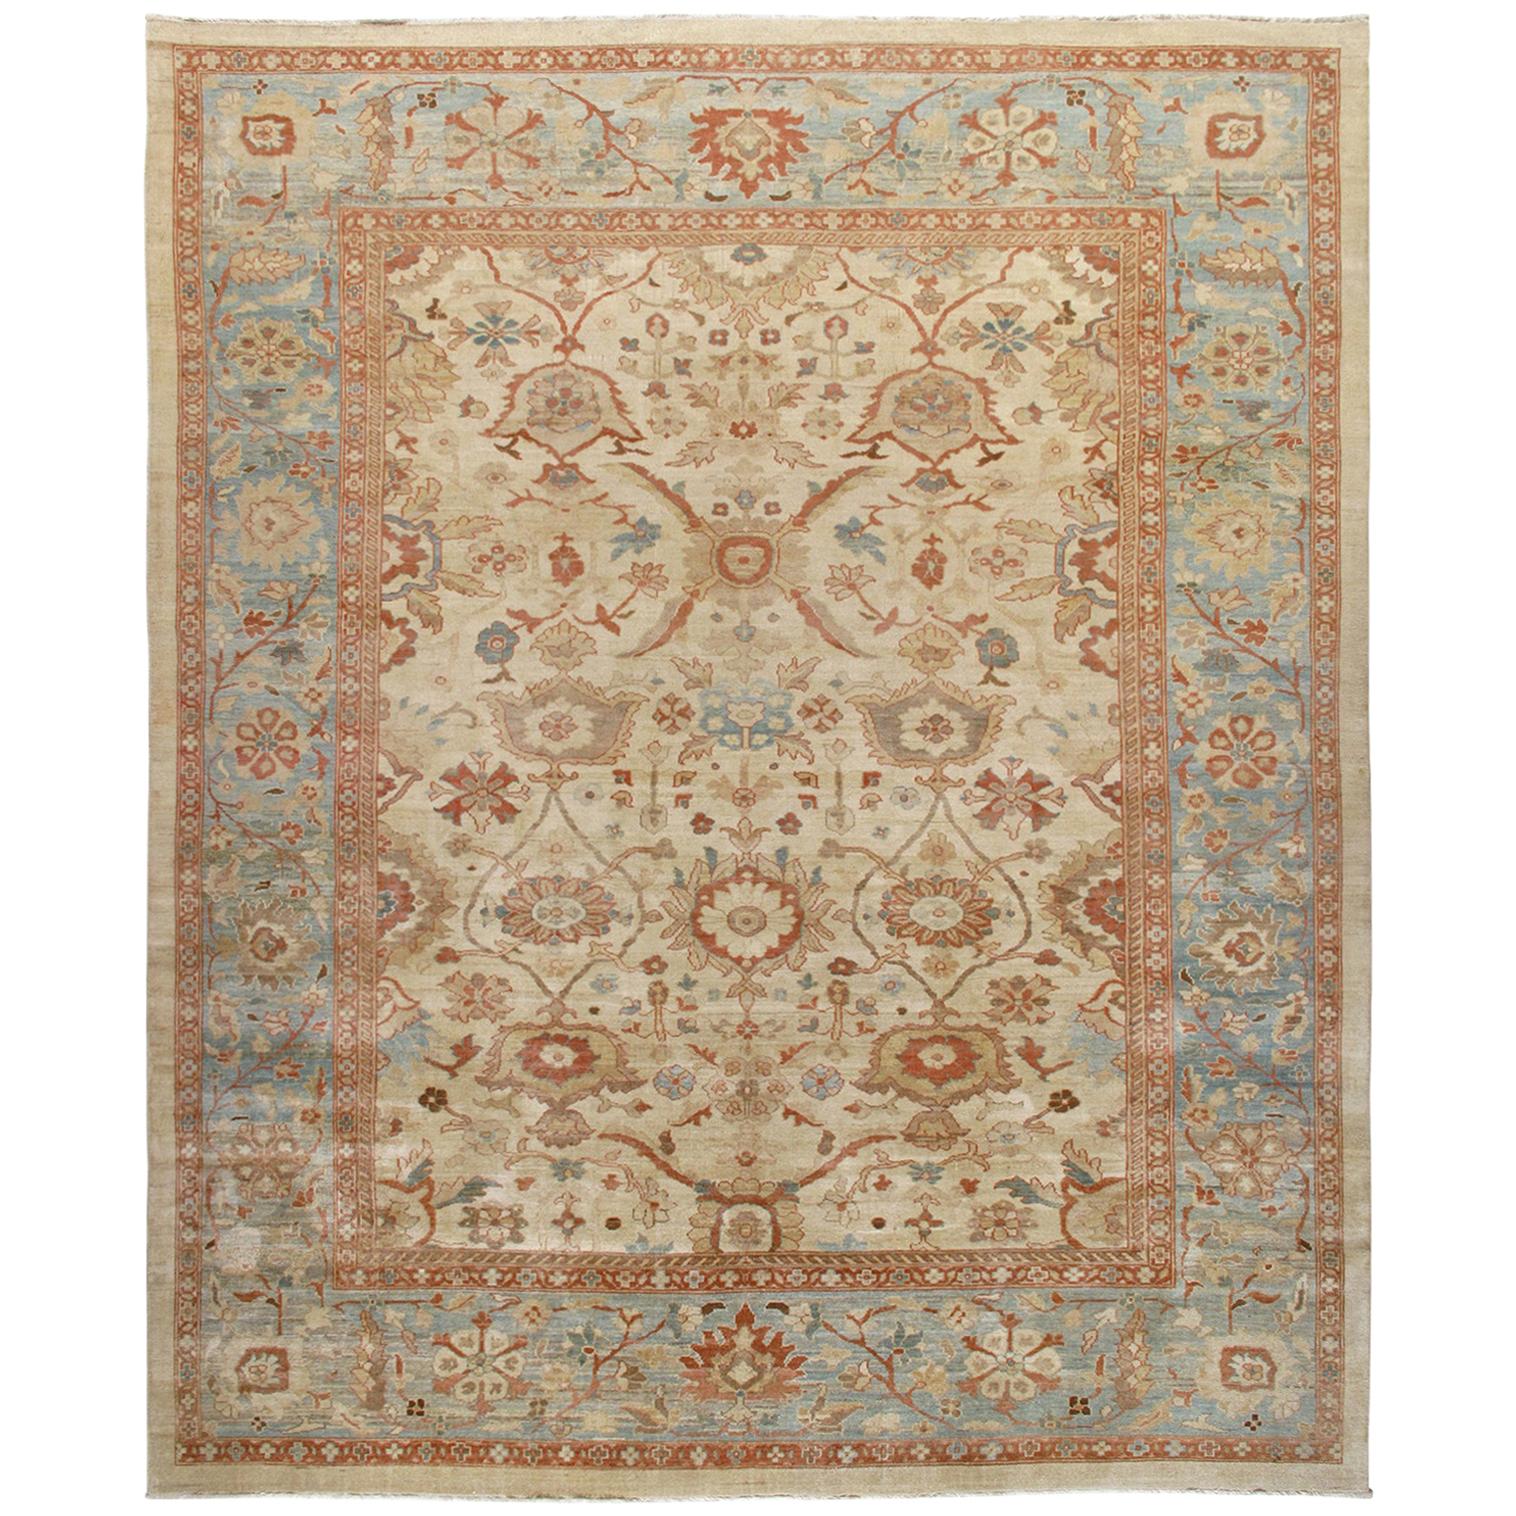 Persian Ziegler Sultanabad Hand Knotted Rug in Pale Blue and Rust Color